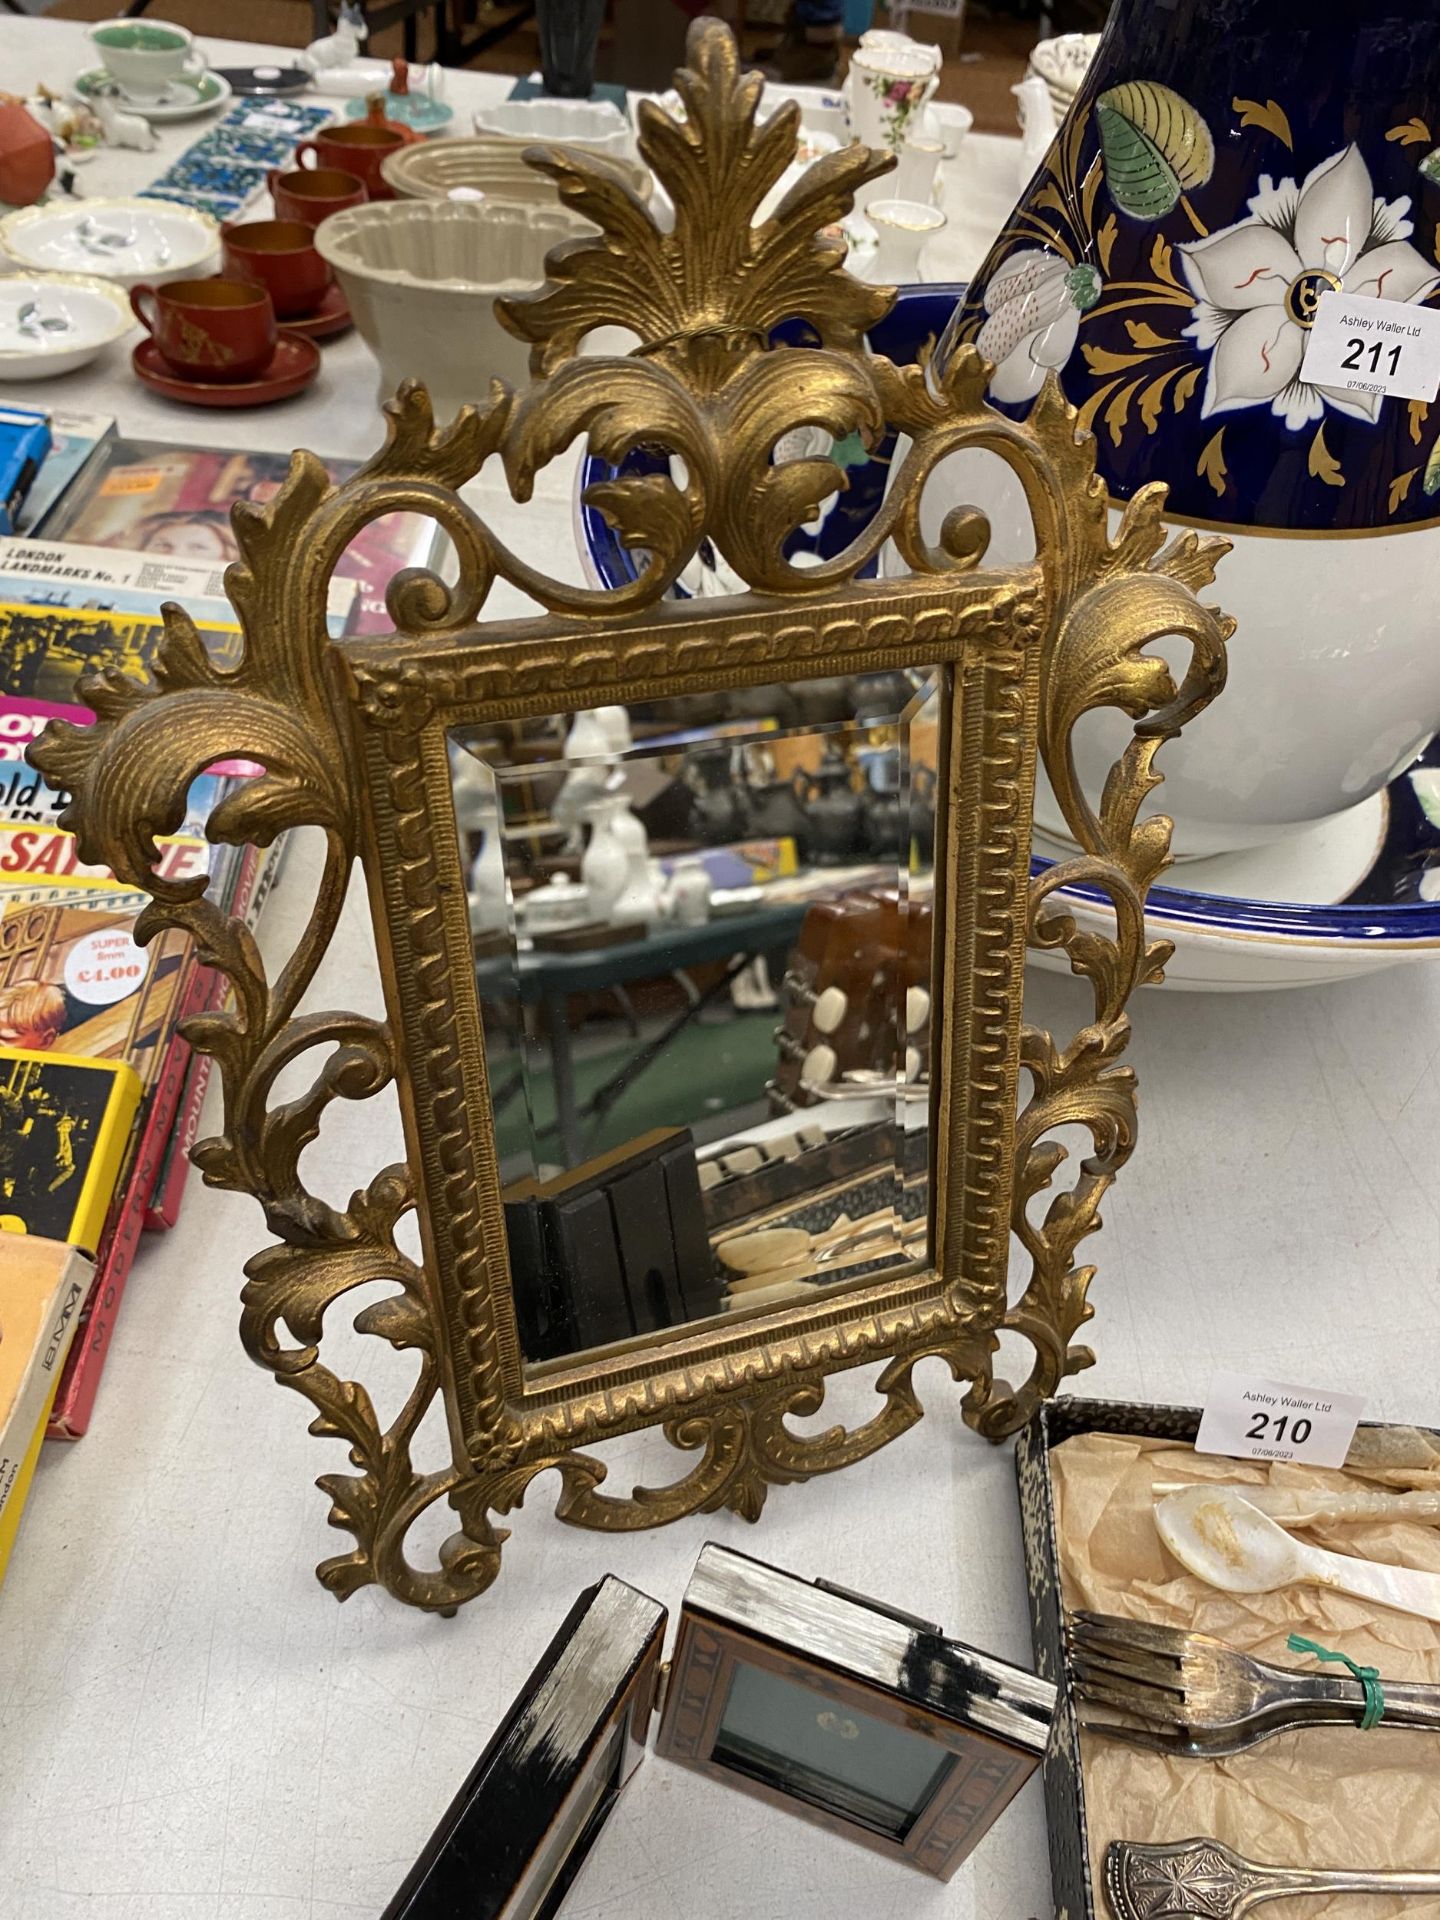 A BRASS MIRROR WITH BEVELLED GLASS, WOOD PICTURE FRAME, SPOON SET, KNIFE SHARPENER, ETC - Image 2 of 3